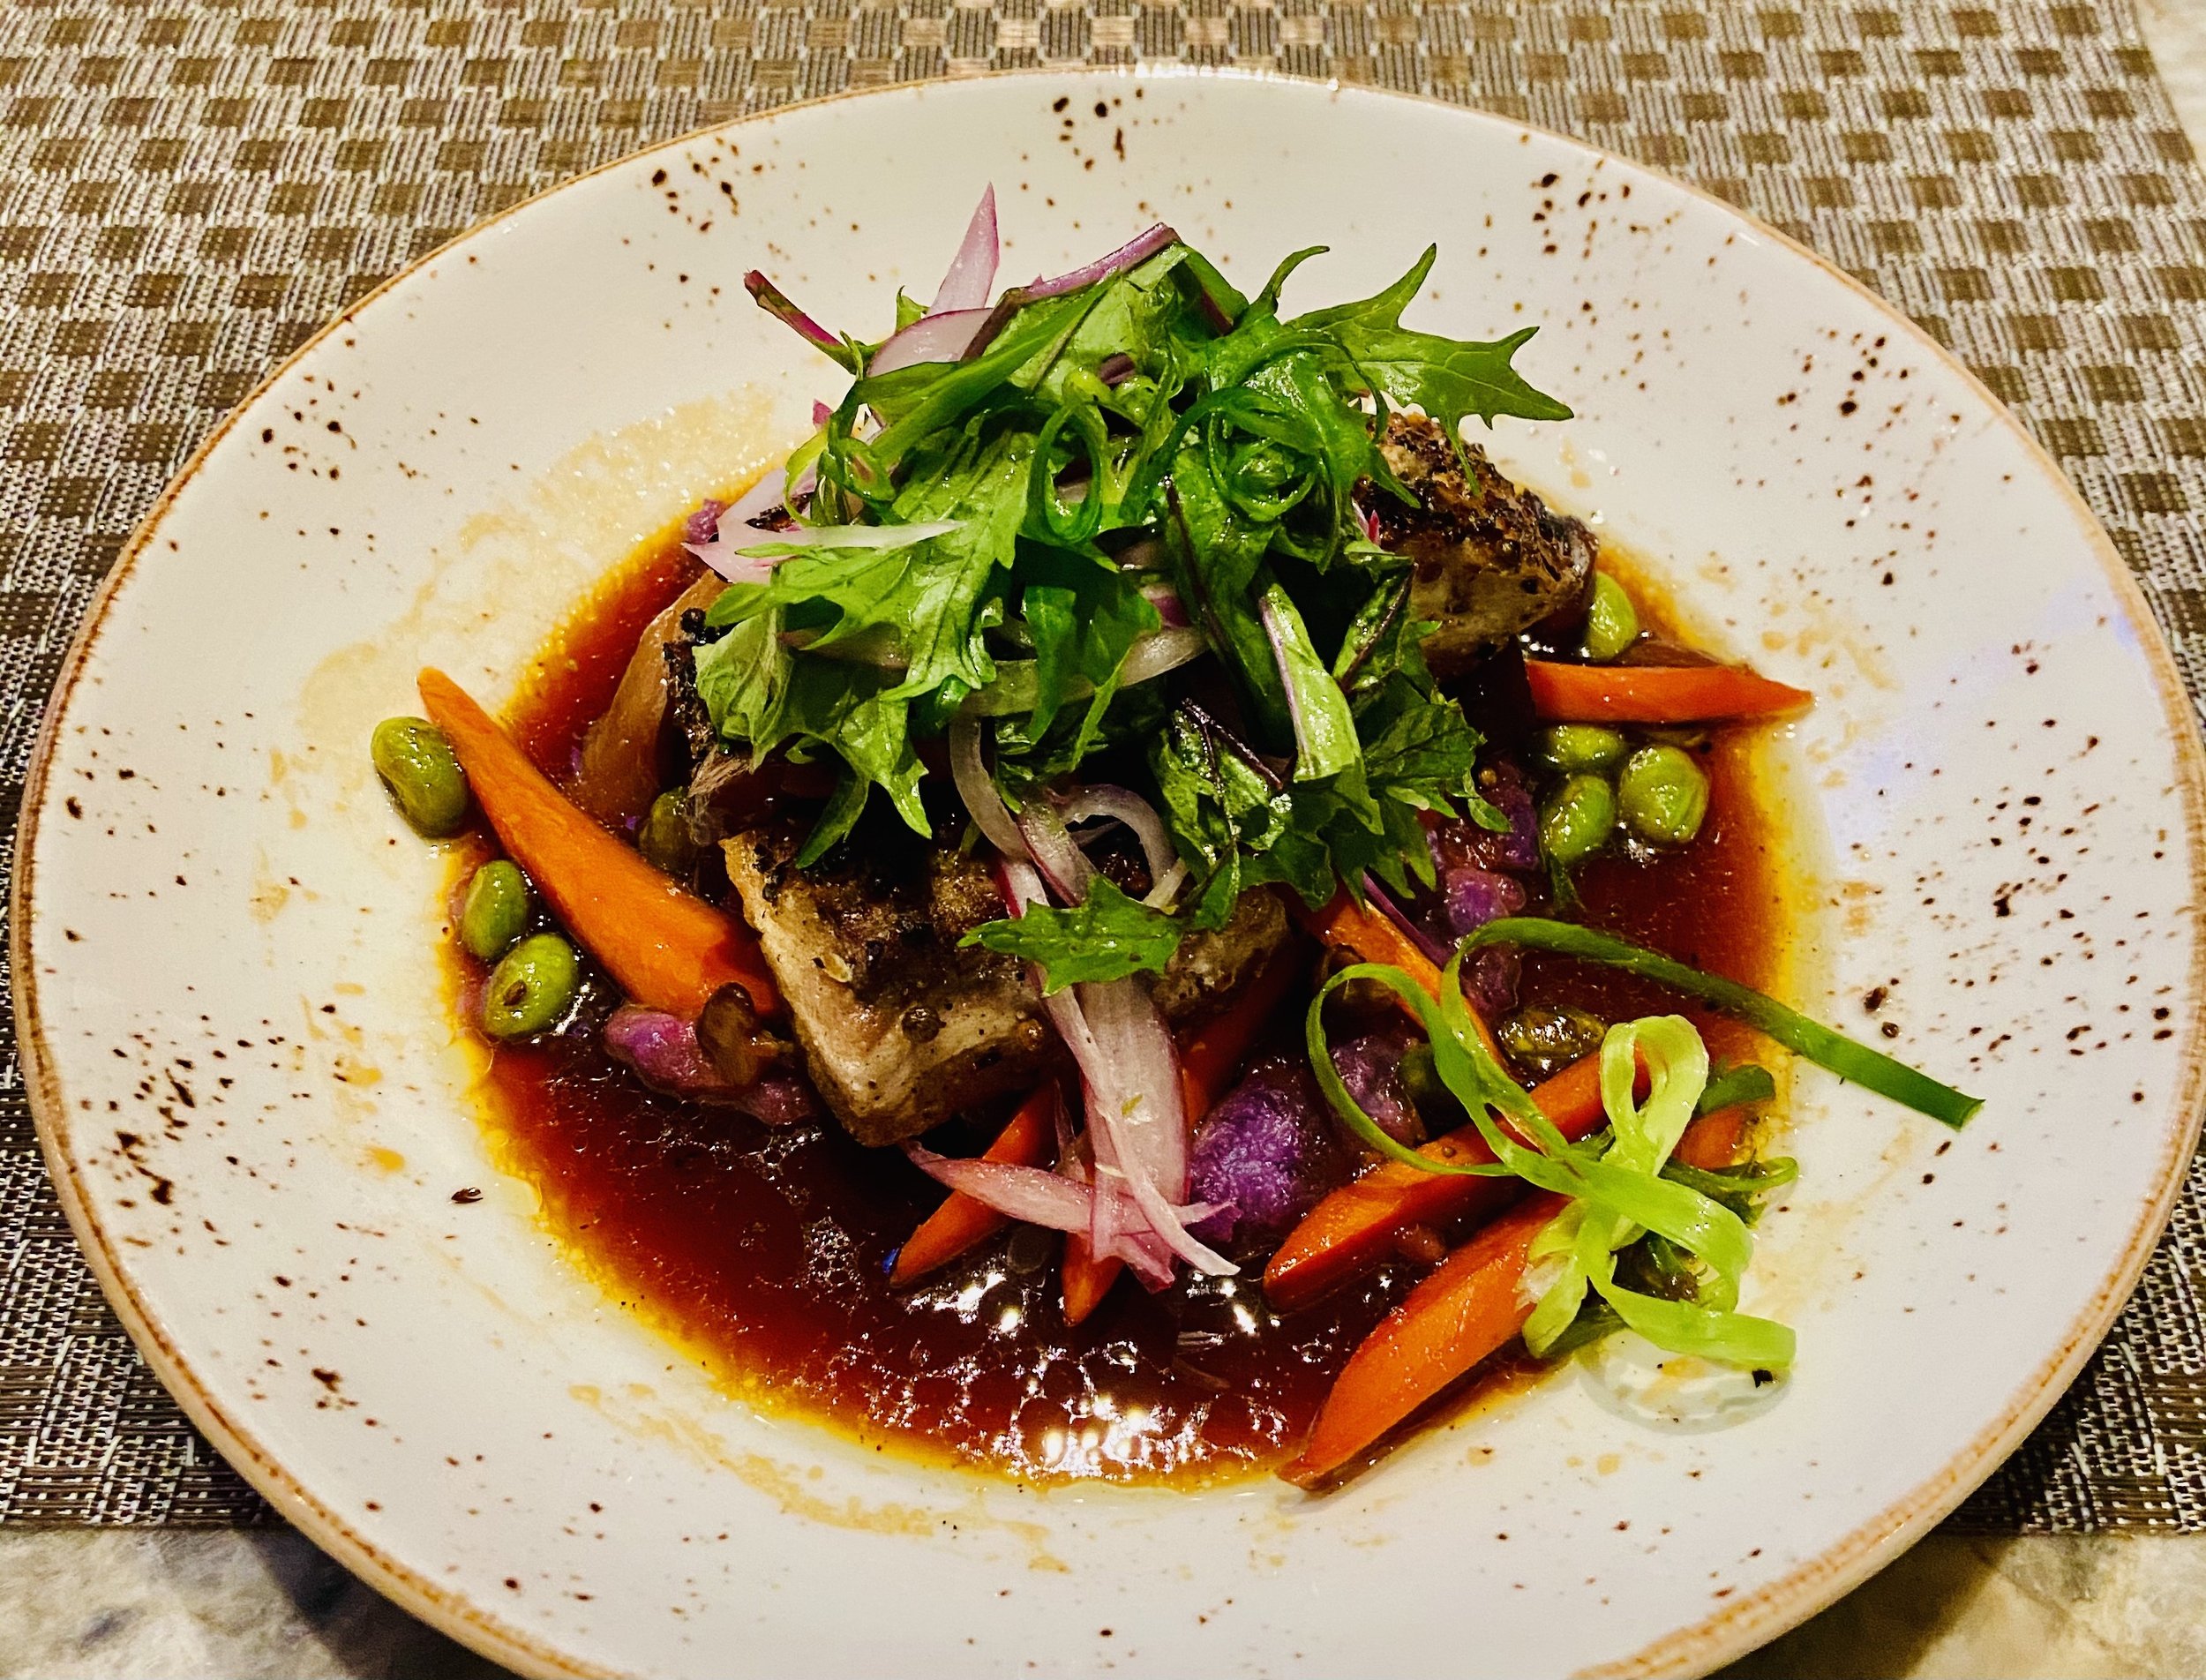  The Inamona Crusted Market Catch with Okinawan sweet potato, smoked carrots, and sweet and sour shiitake jus.  